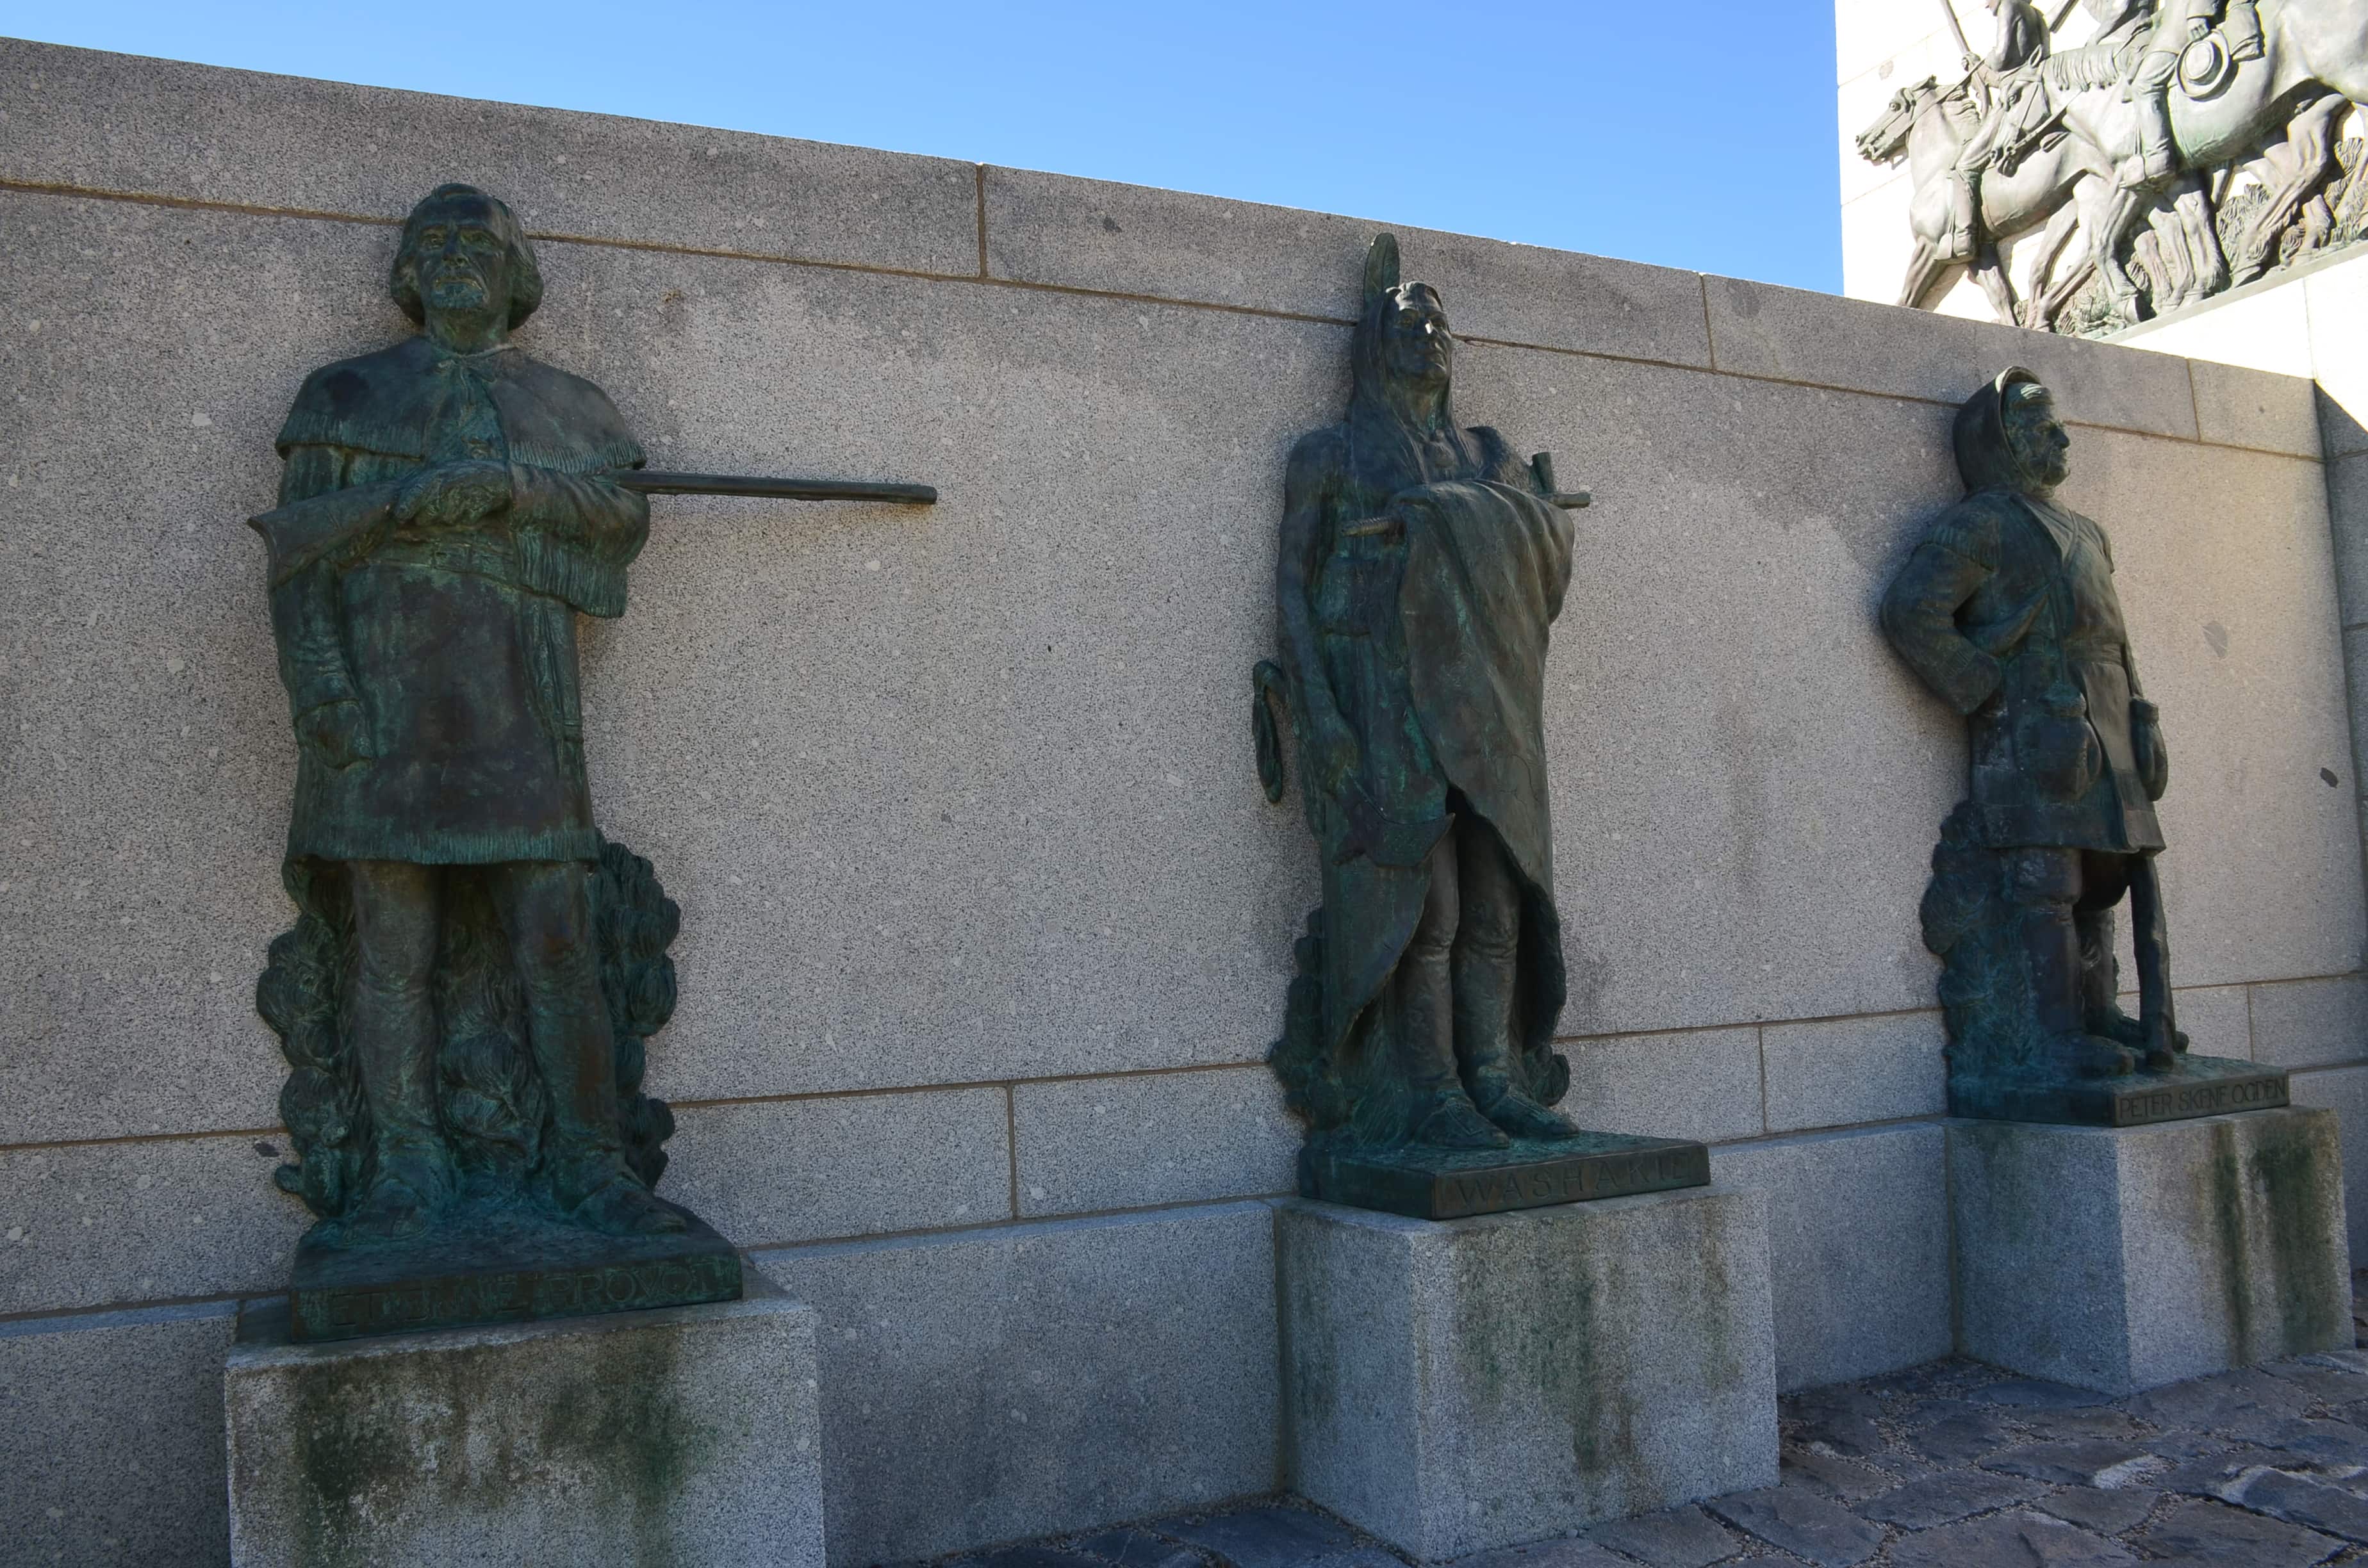 Figures on the east side on the This Is the Place Monument in Salt Lake City, Utah